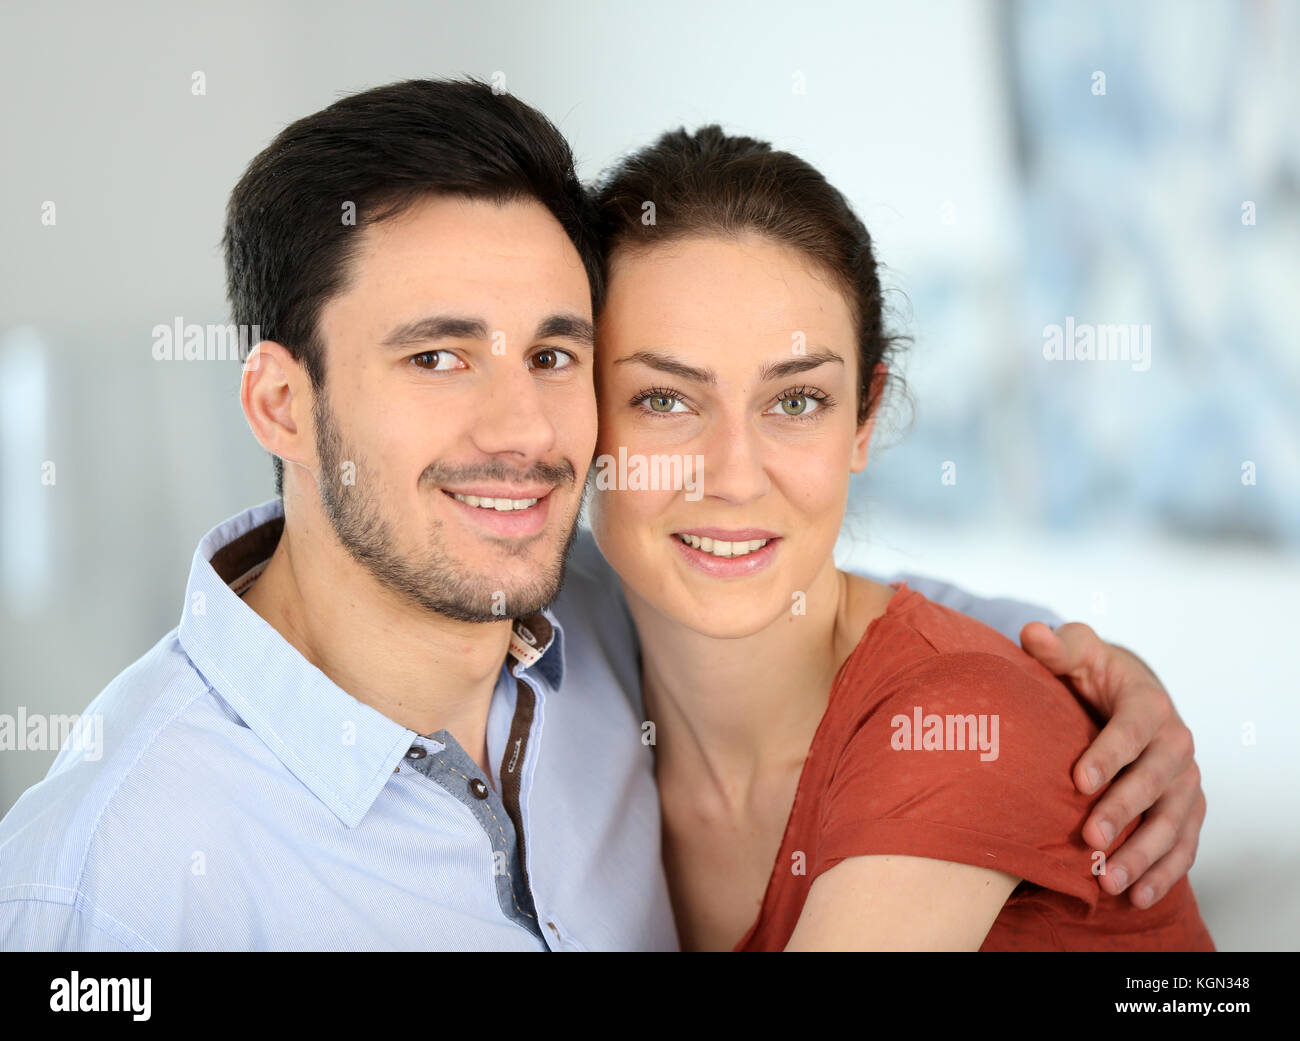 Portrait of loving couple at home Stock Photo